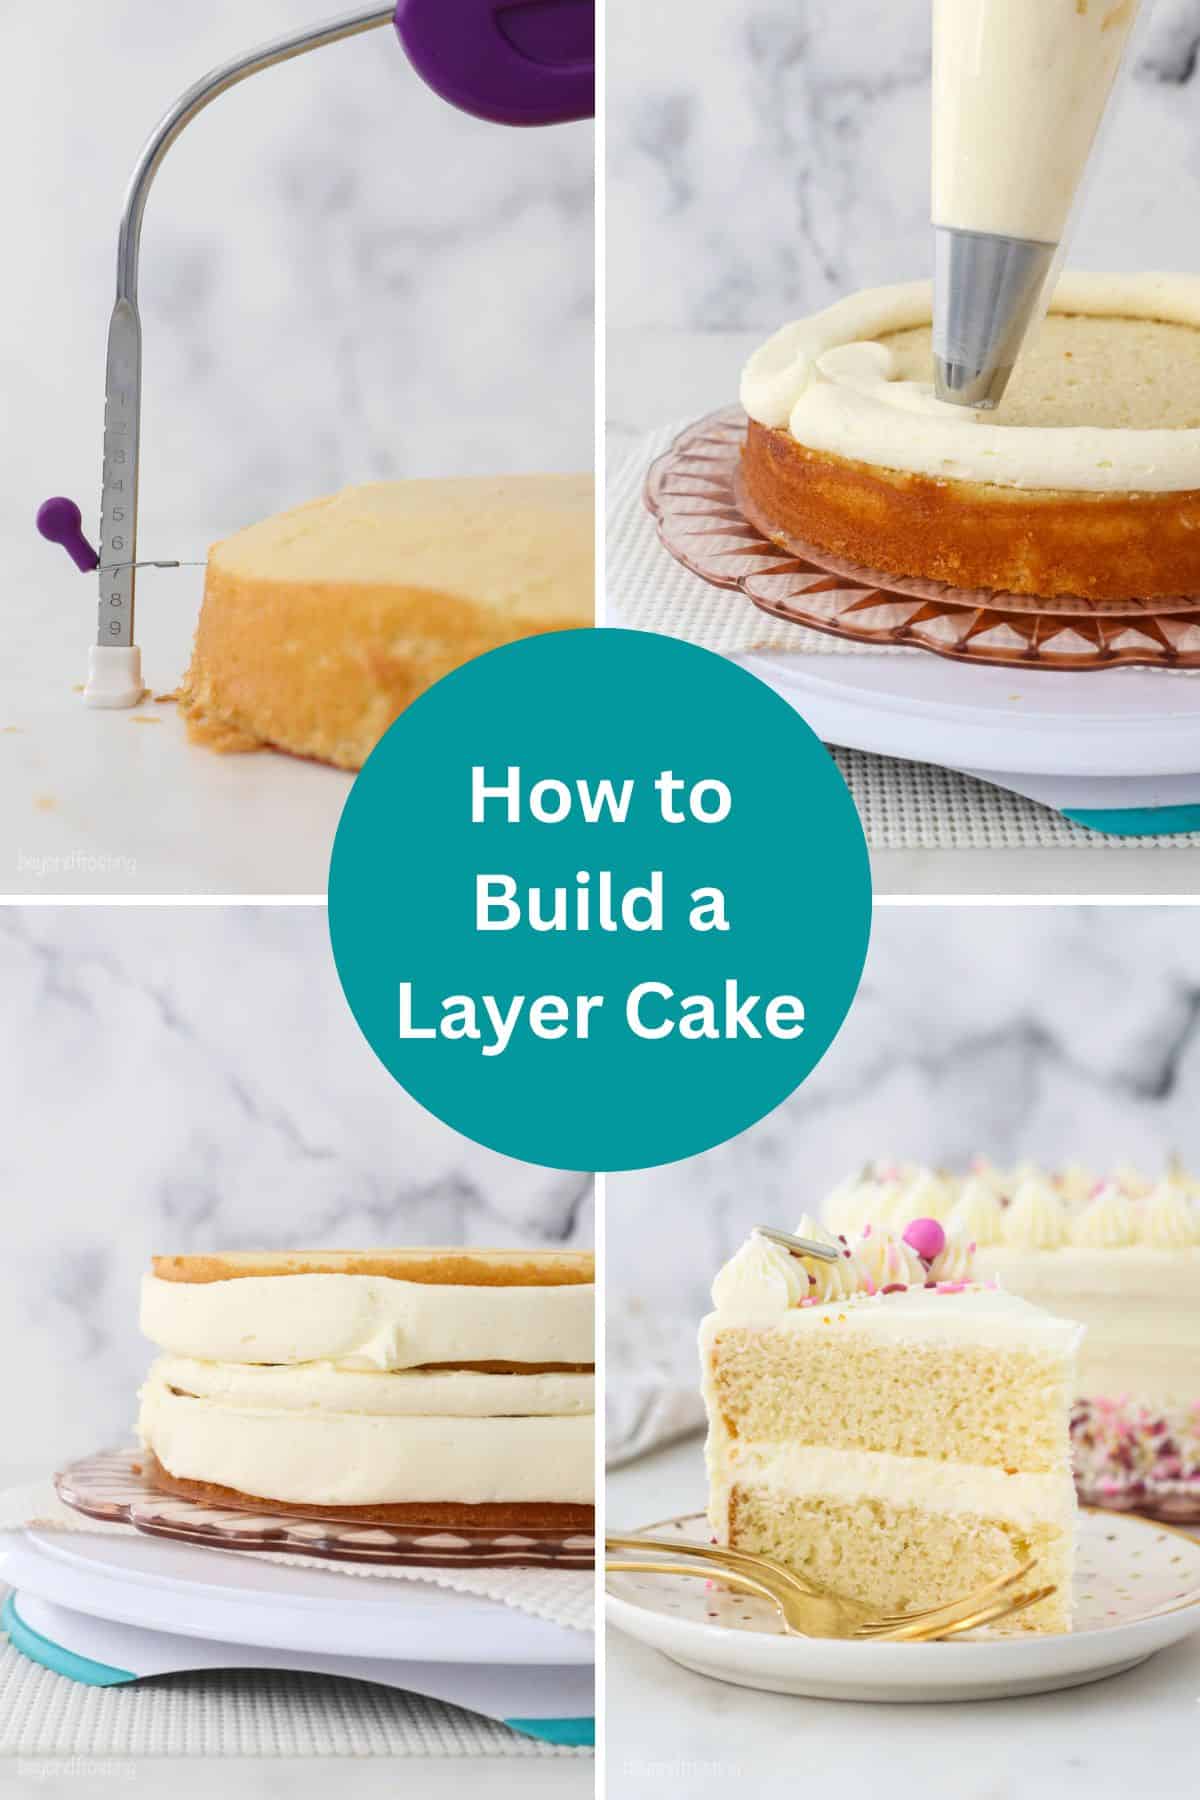 A 4-photo collage of various stages of making a layer cake with the title "How to Build a Layer Cake" in the center.